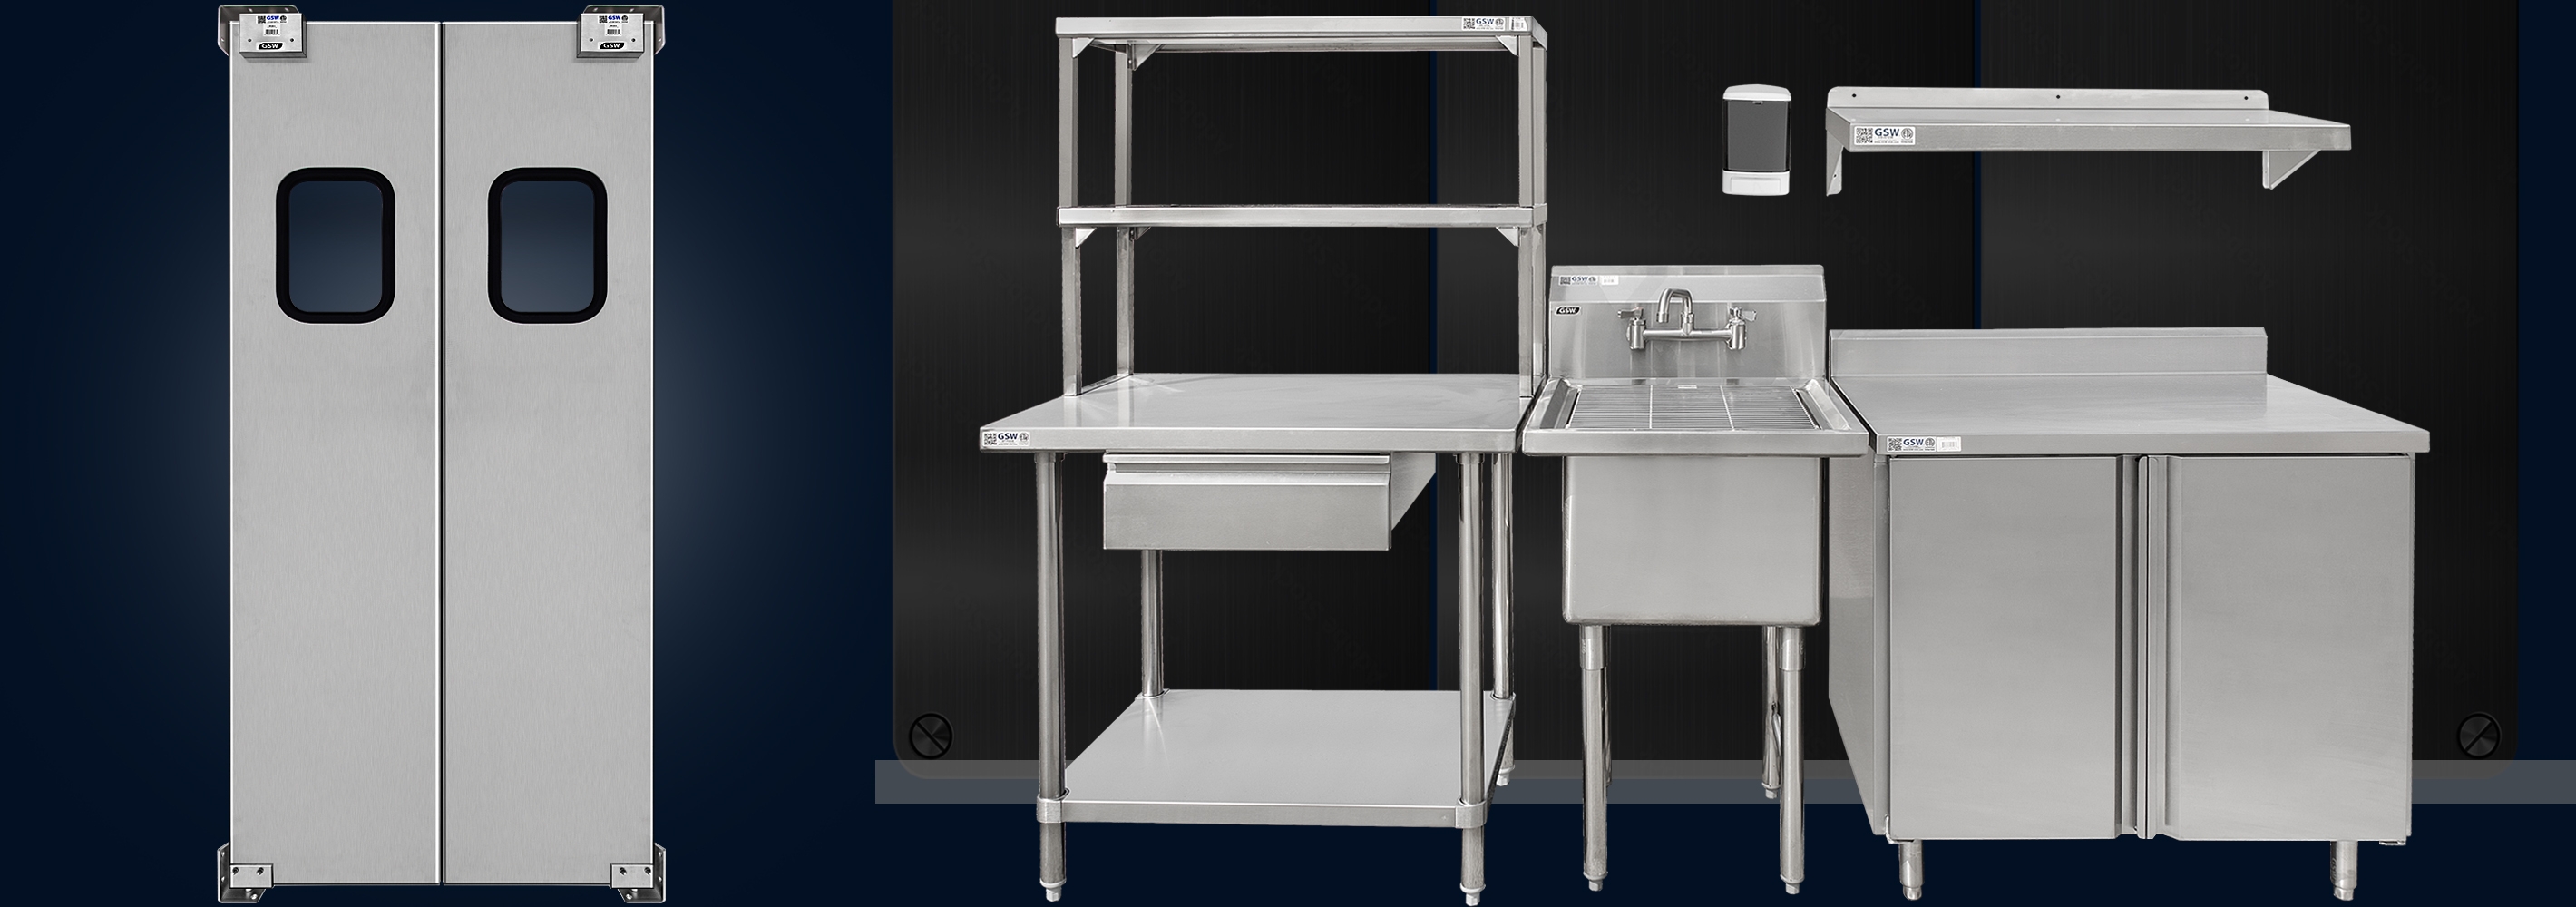 GSW Stainless Steel Work Tables, Equipment Stands